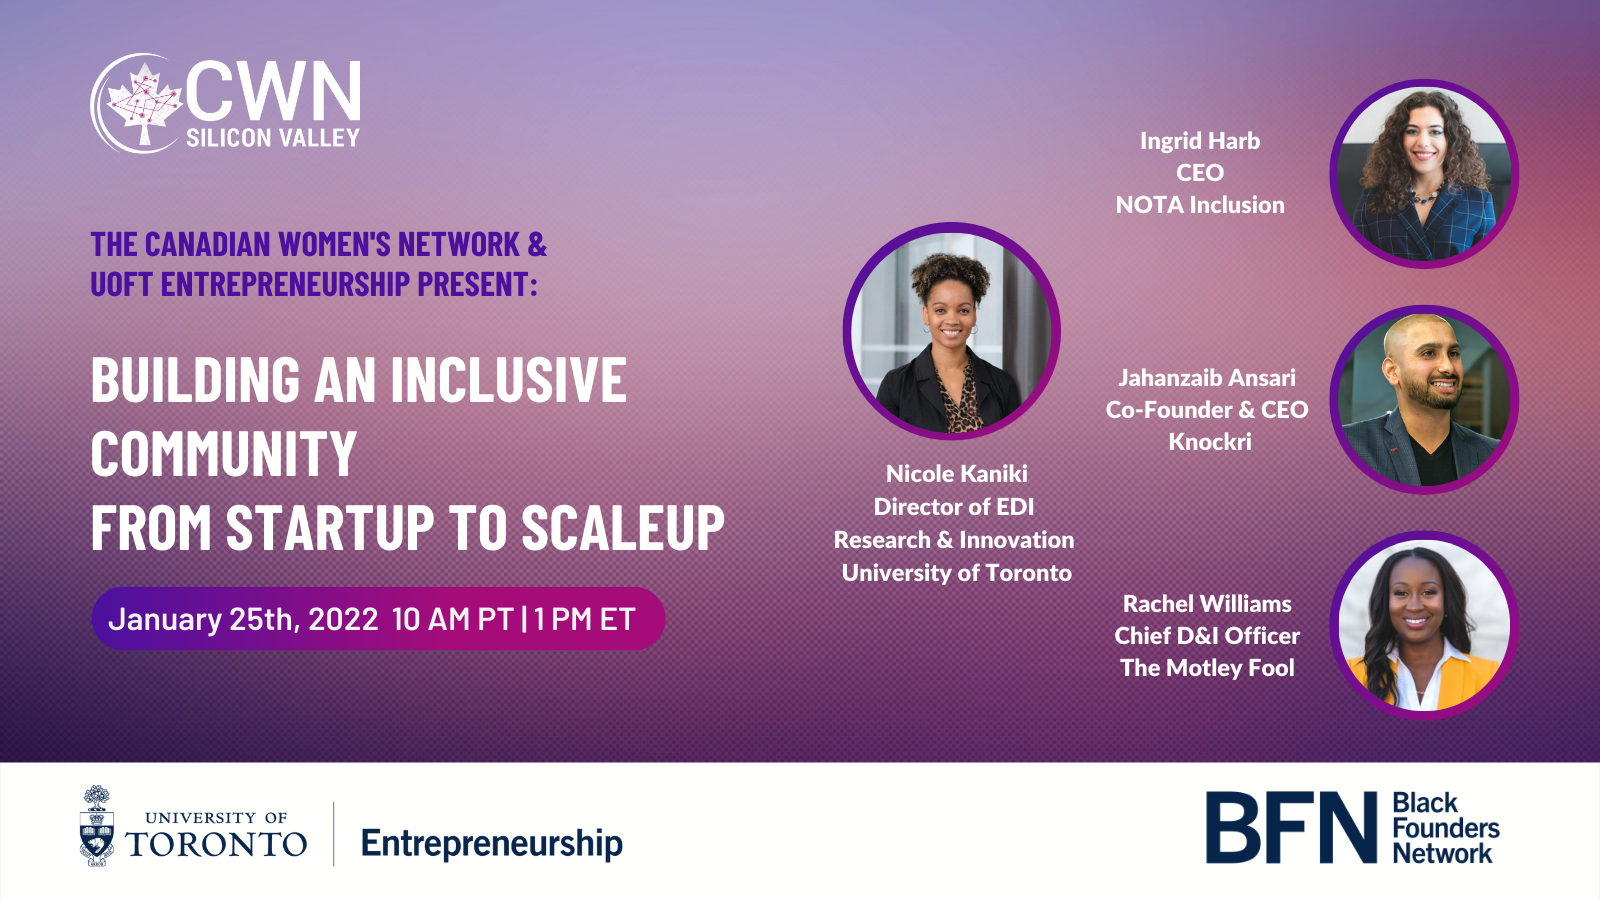 Building an Inclusive Community from Startup to Scaleup